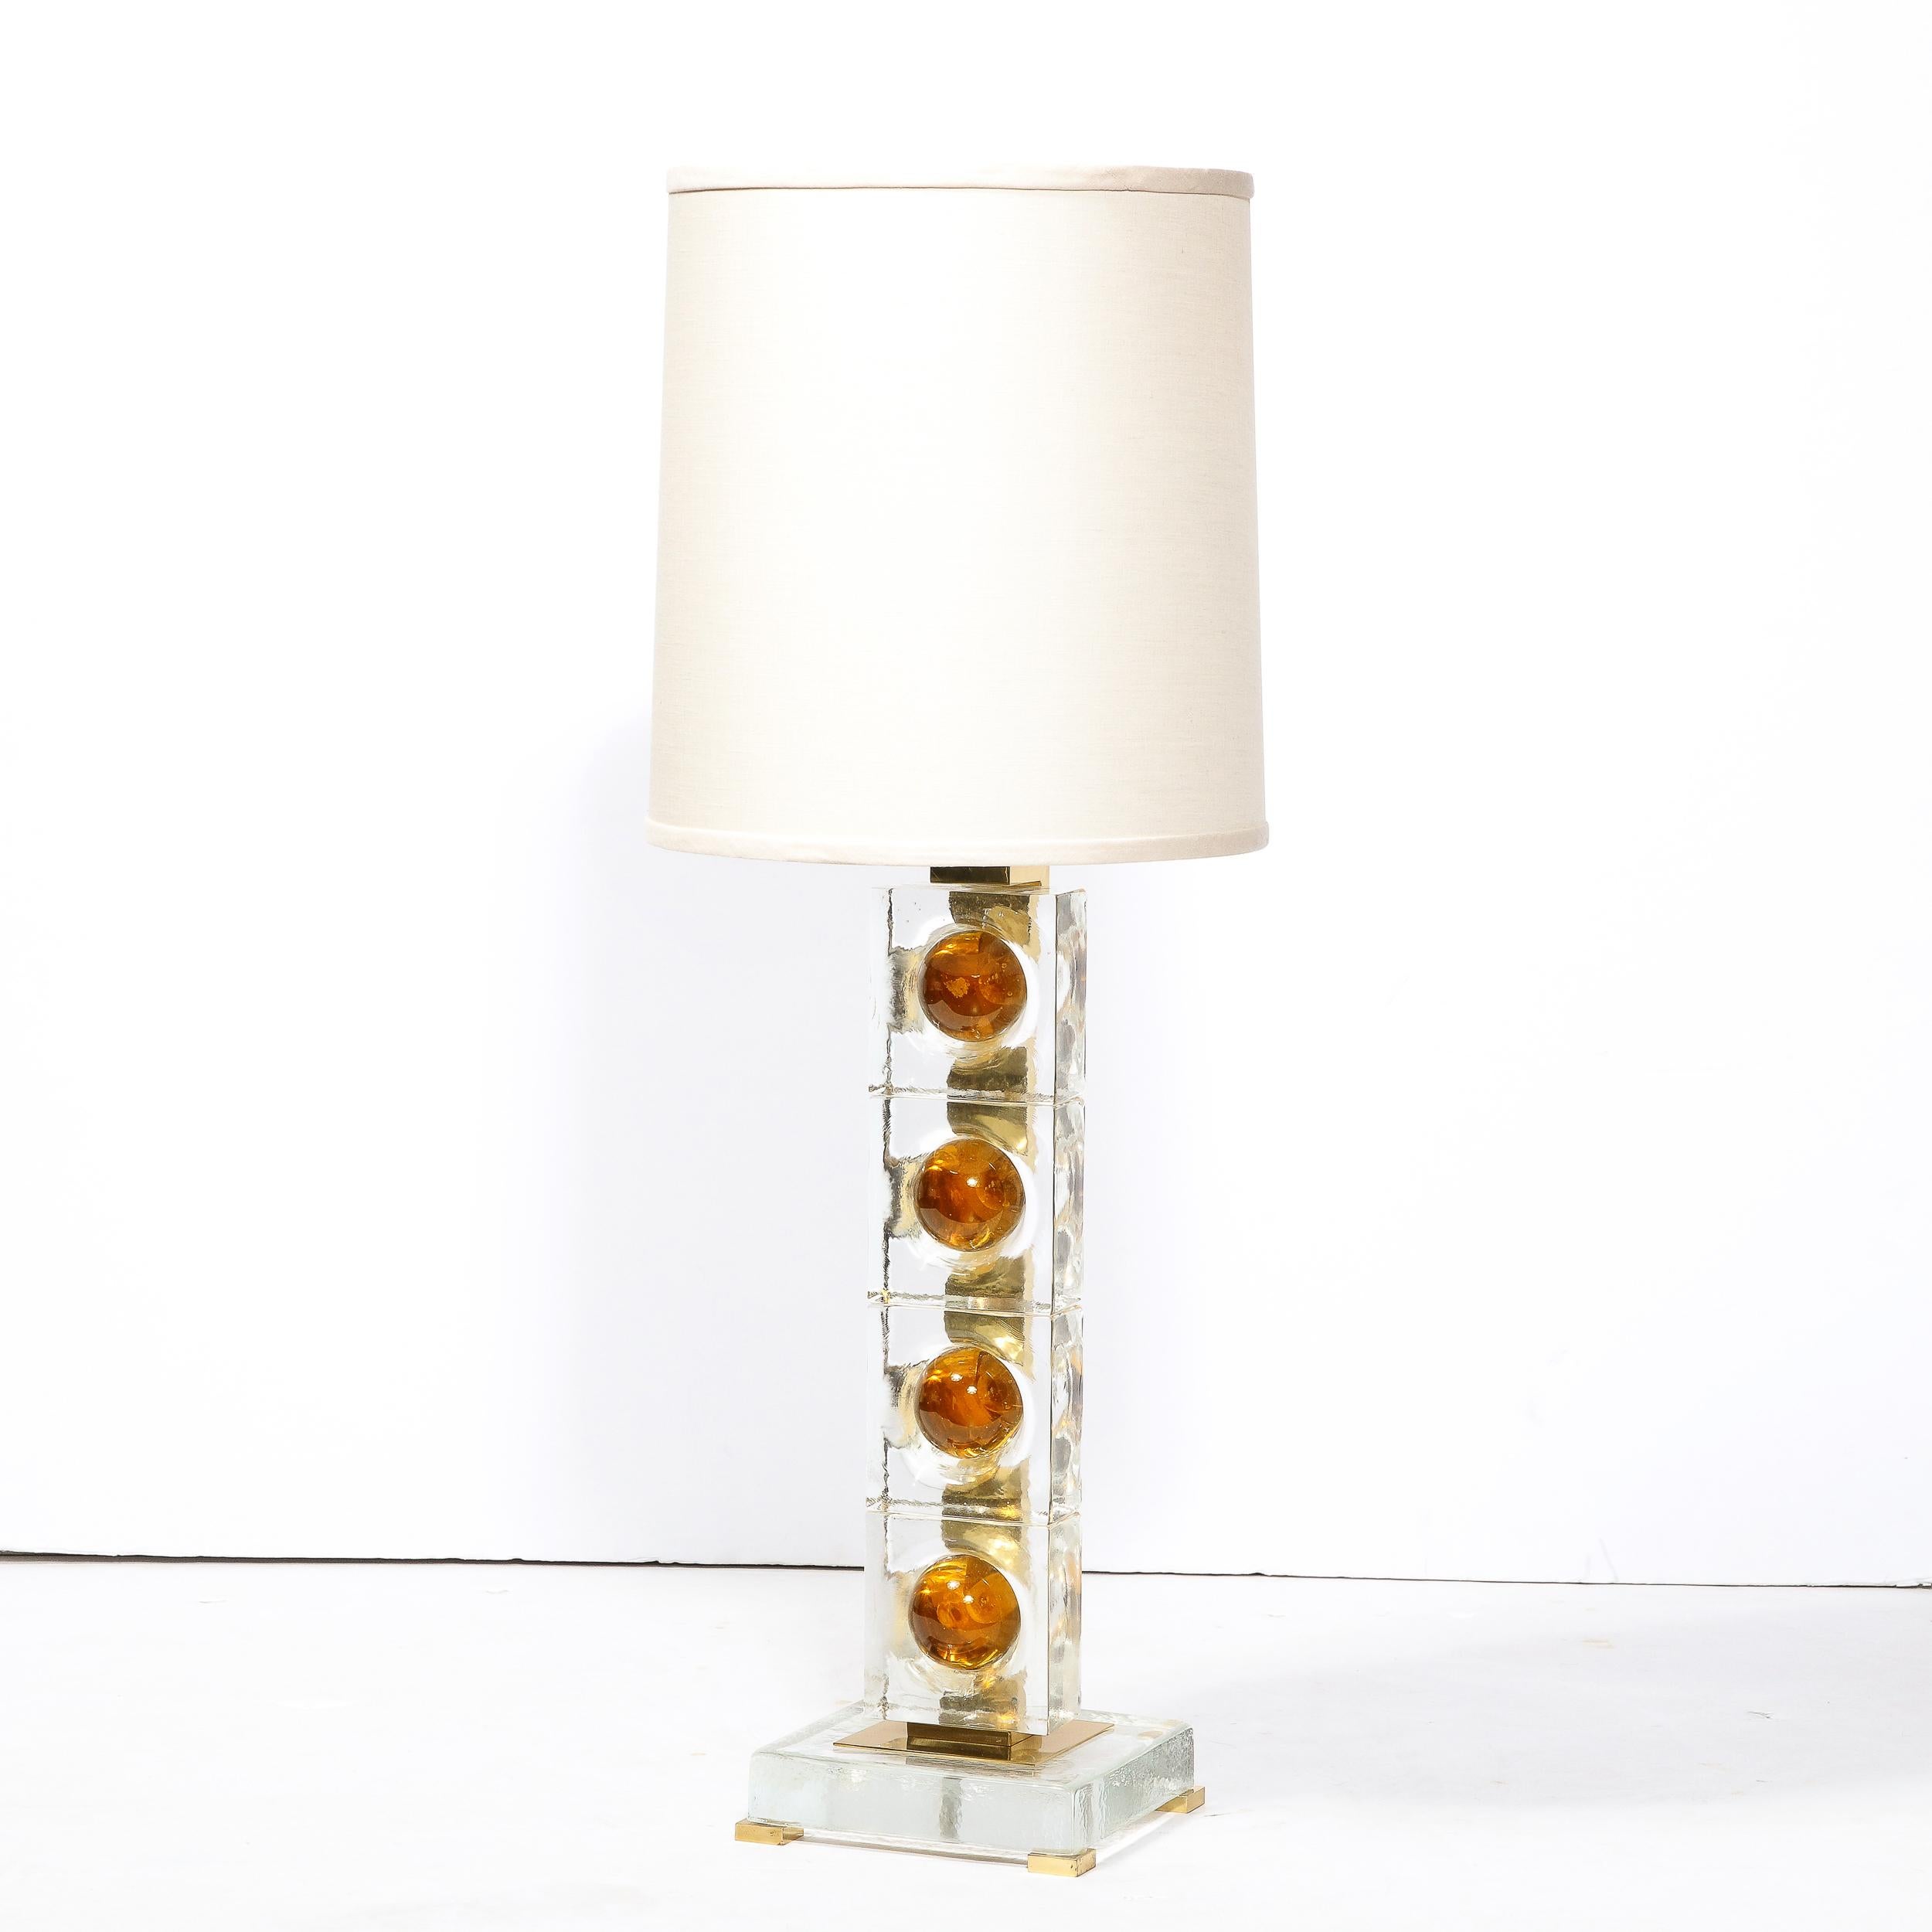 20th Century Pair of Modernist Stacked Sphere Table Lamps in Amber & Translucent Murano Glass